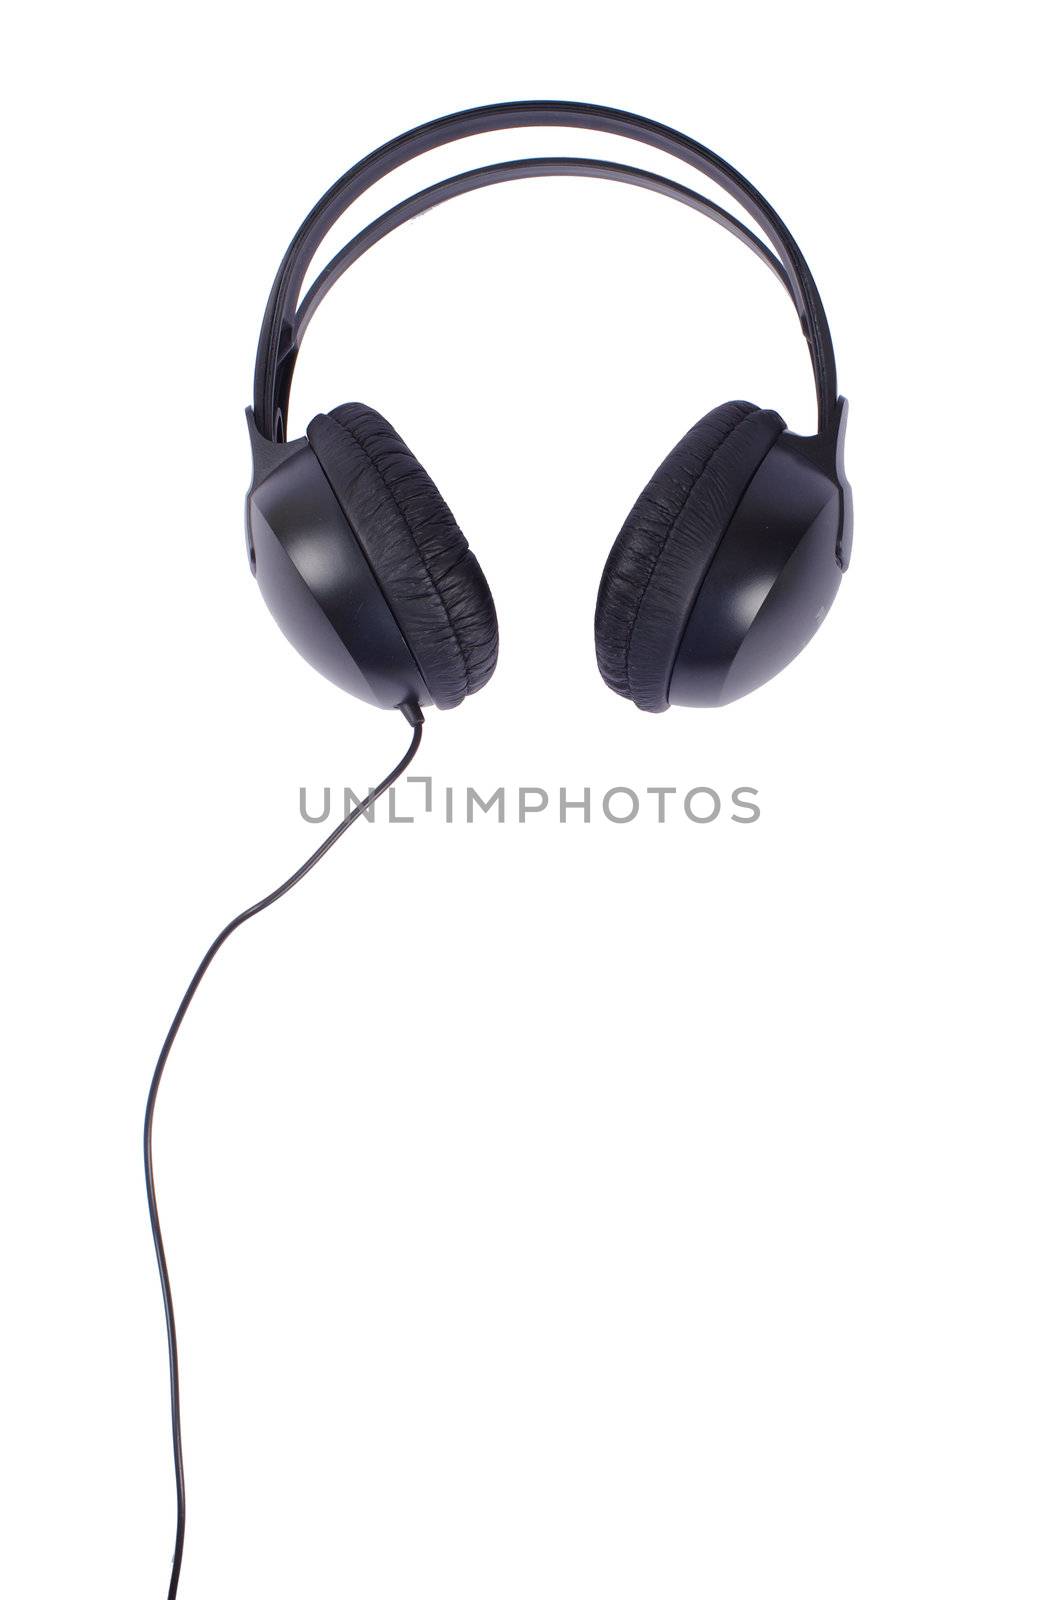 headphones isolated on a white